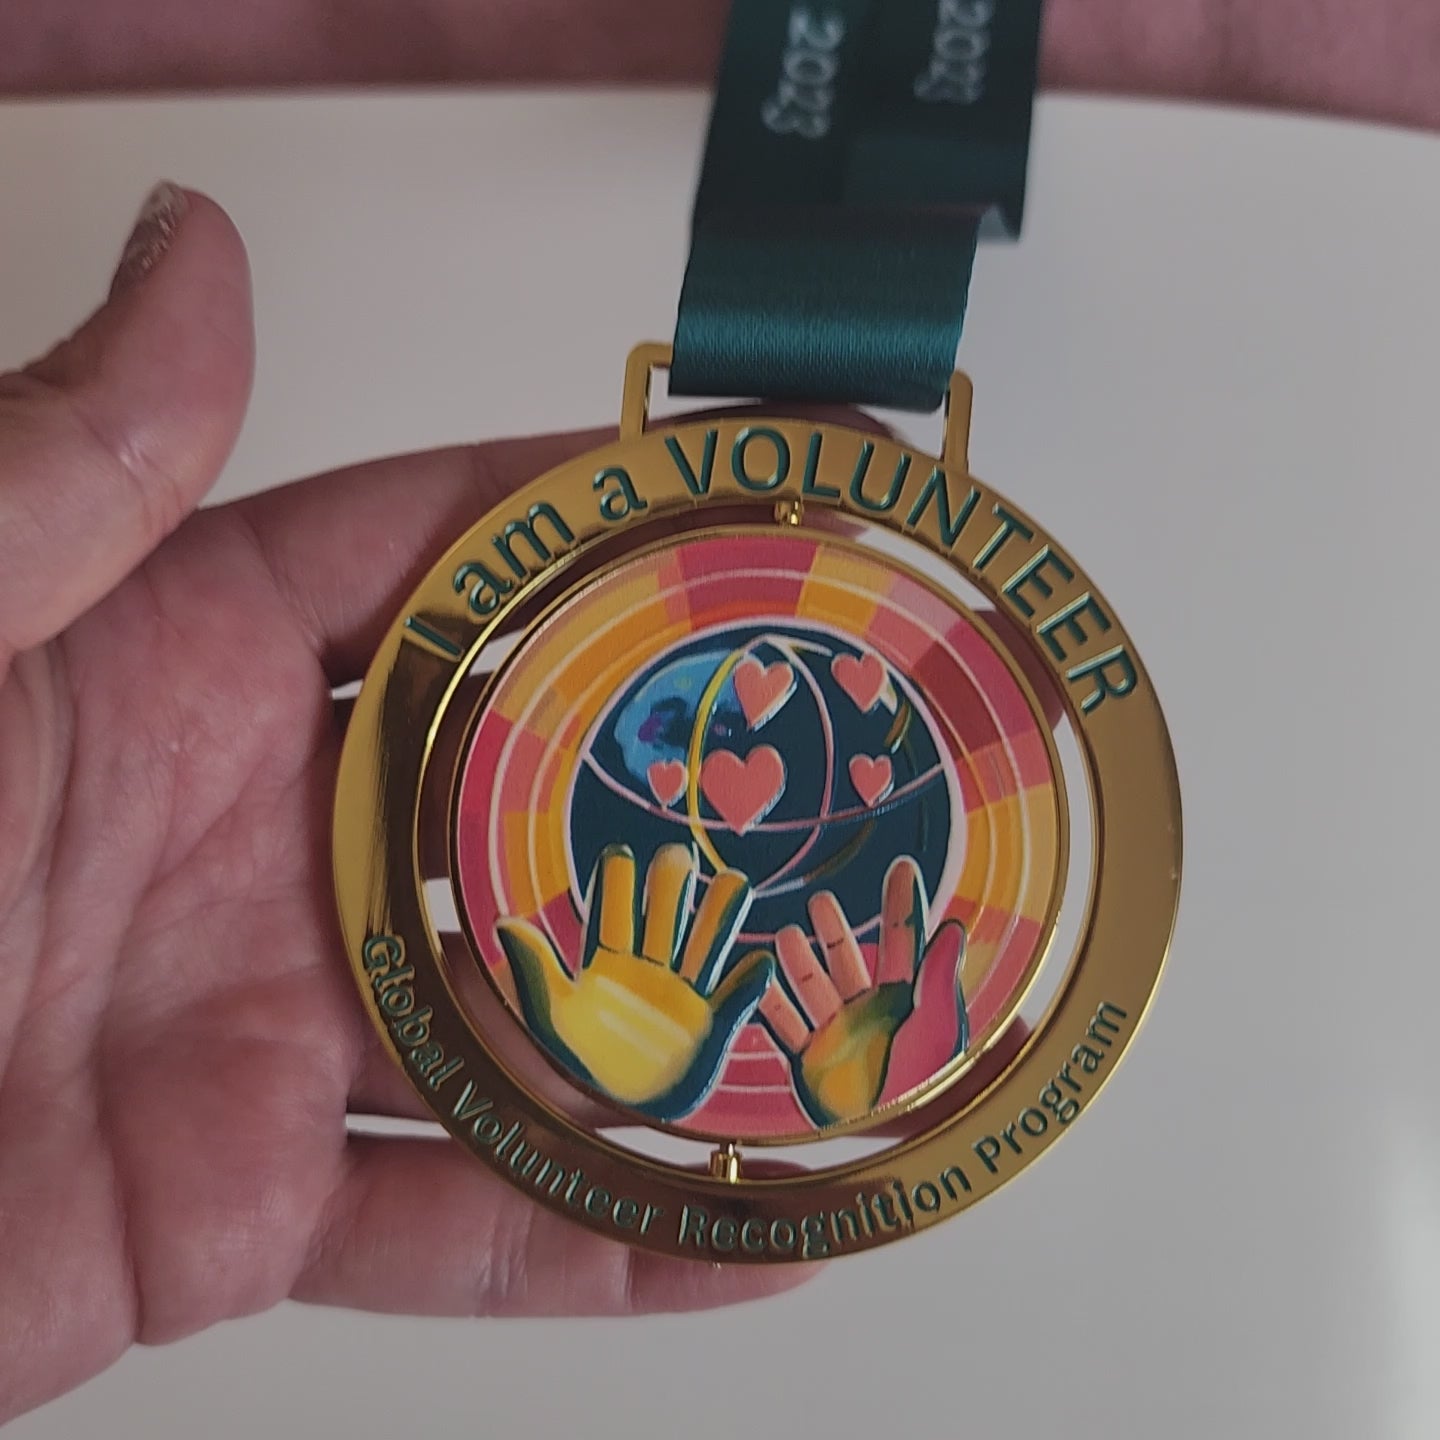 video of the medal showing that it spins